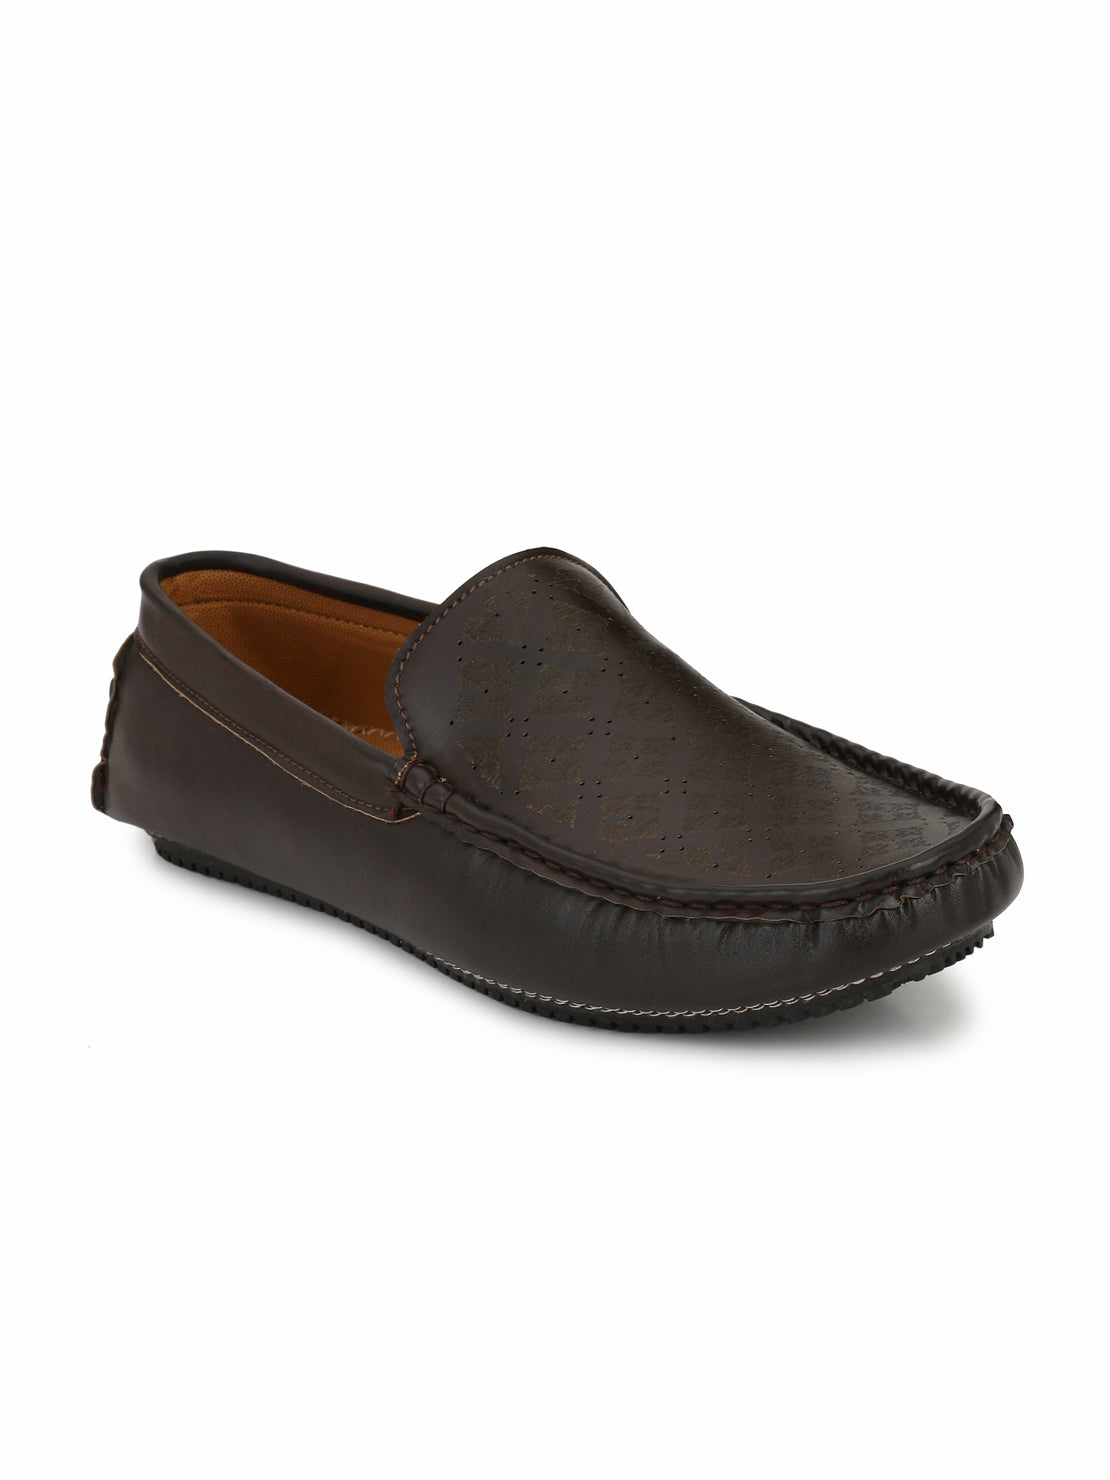 Guava Men's Brown Casual Slip On Driving Loafers (GV15JA607)